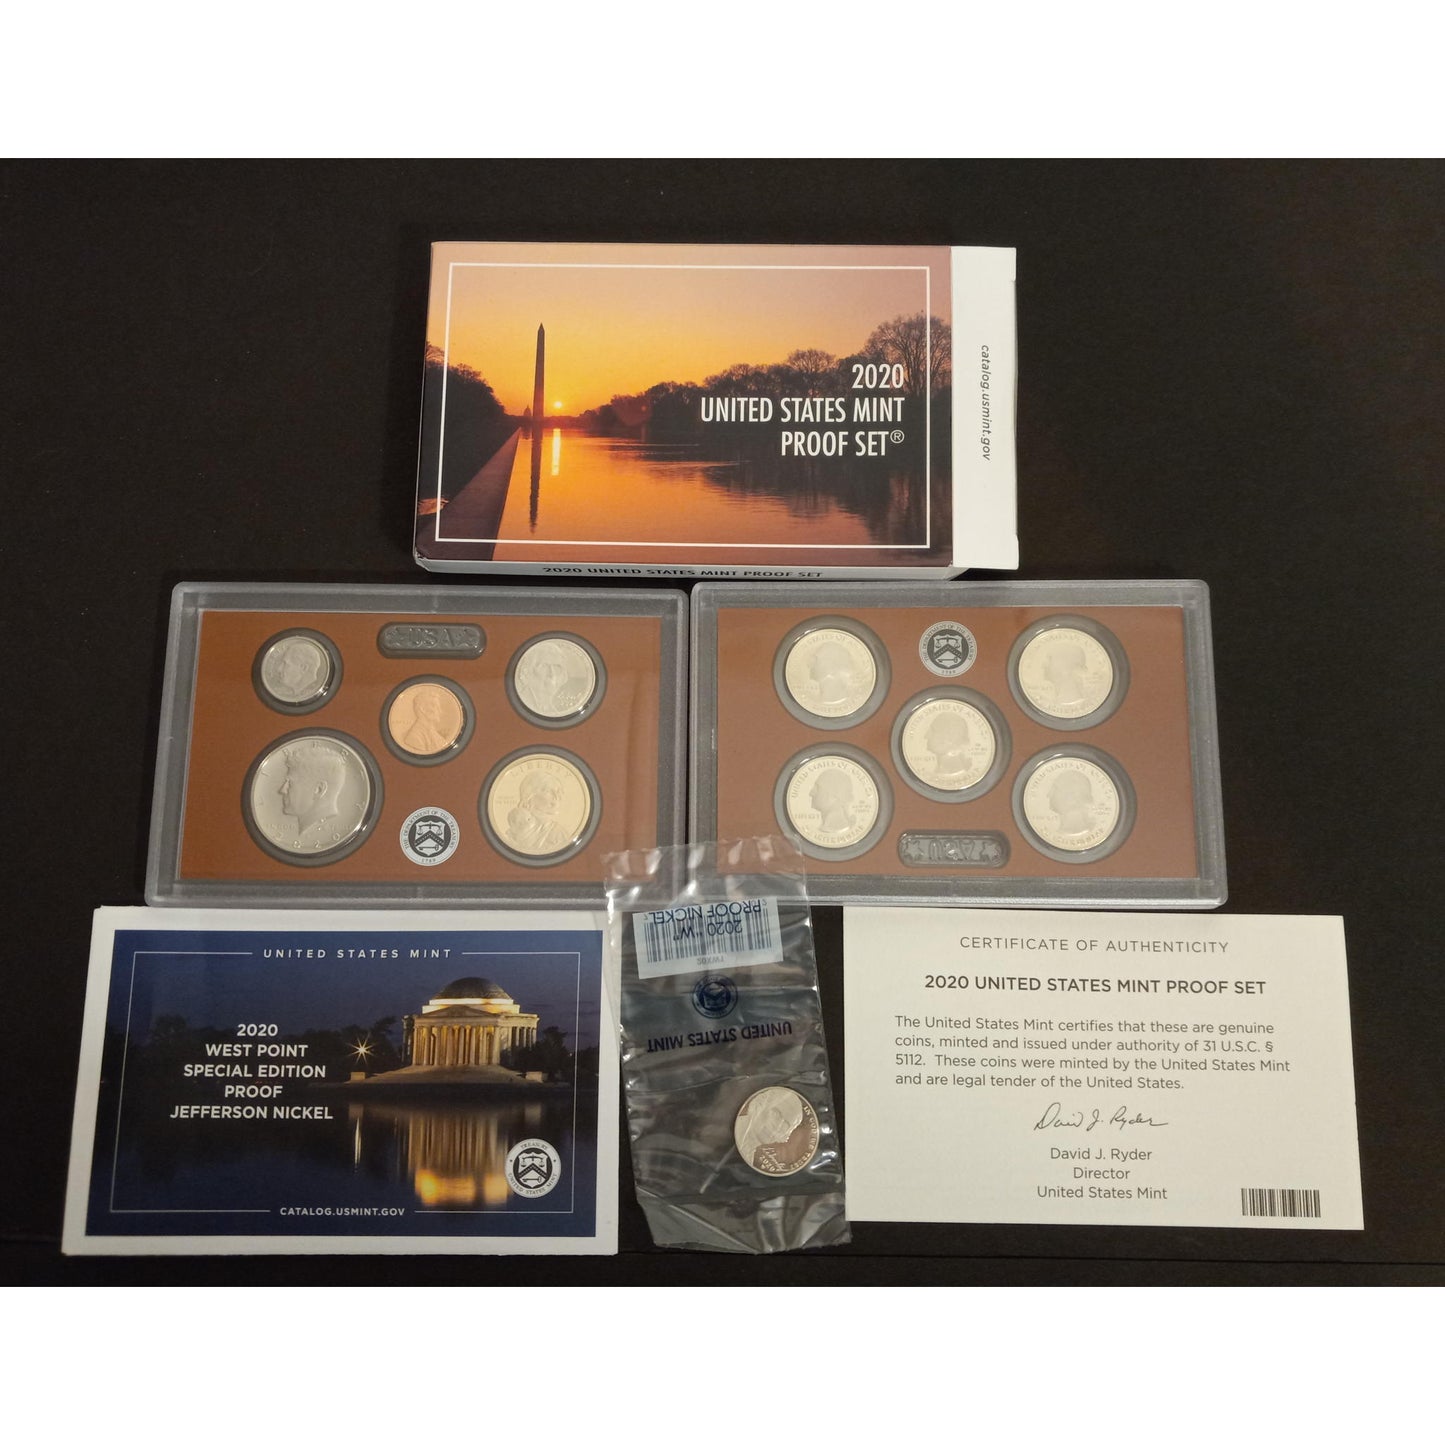 2020 United States Mint PROOF SET ( CLAD ) with PROOF W NICKEL - OGP & COA!